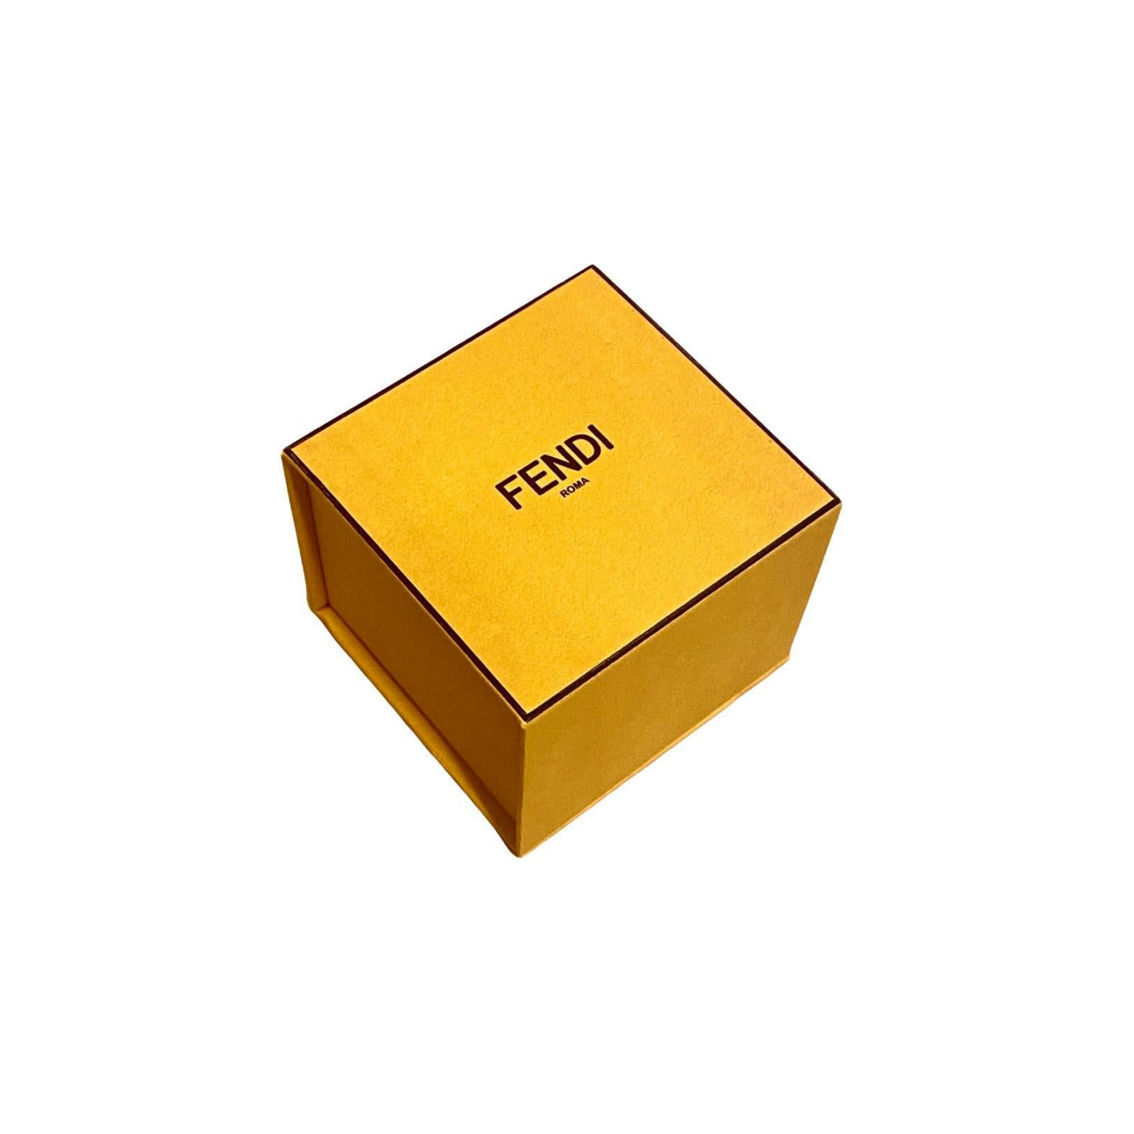 Fendi First Gold Finish Metal and White Crystal Small Fashion Ring (New) - Image 3 of 3